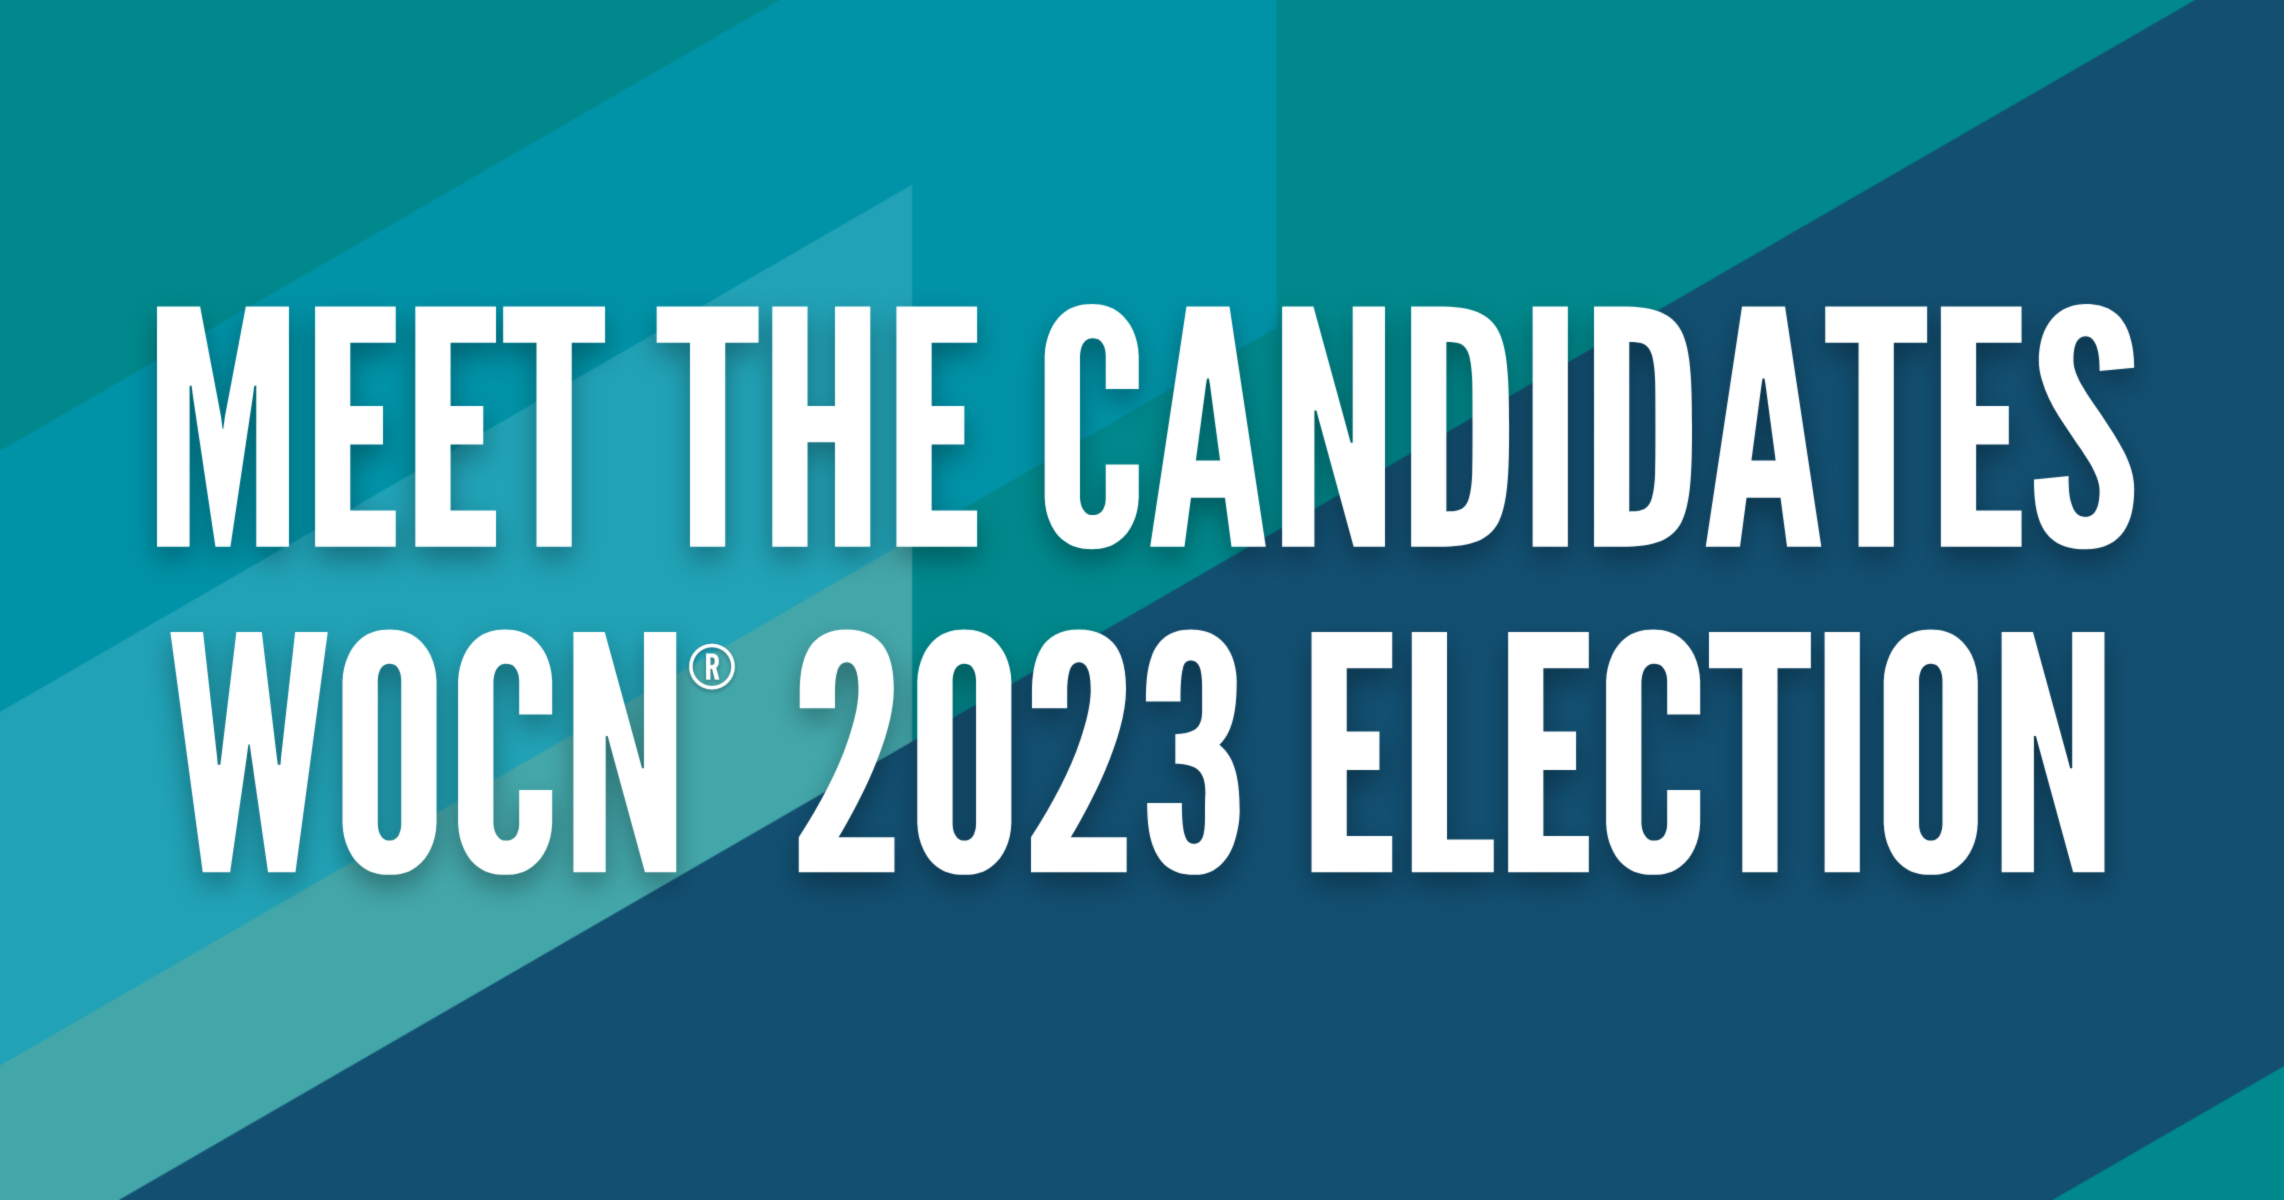 Meet the Candidates for the WOCN 2023 Election